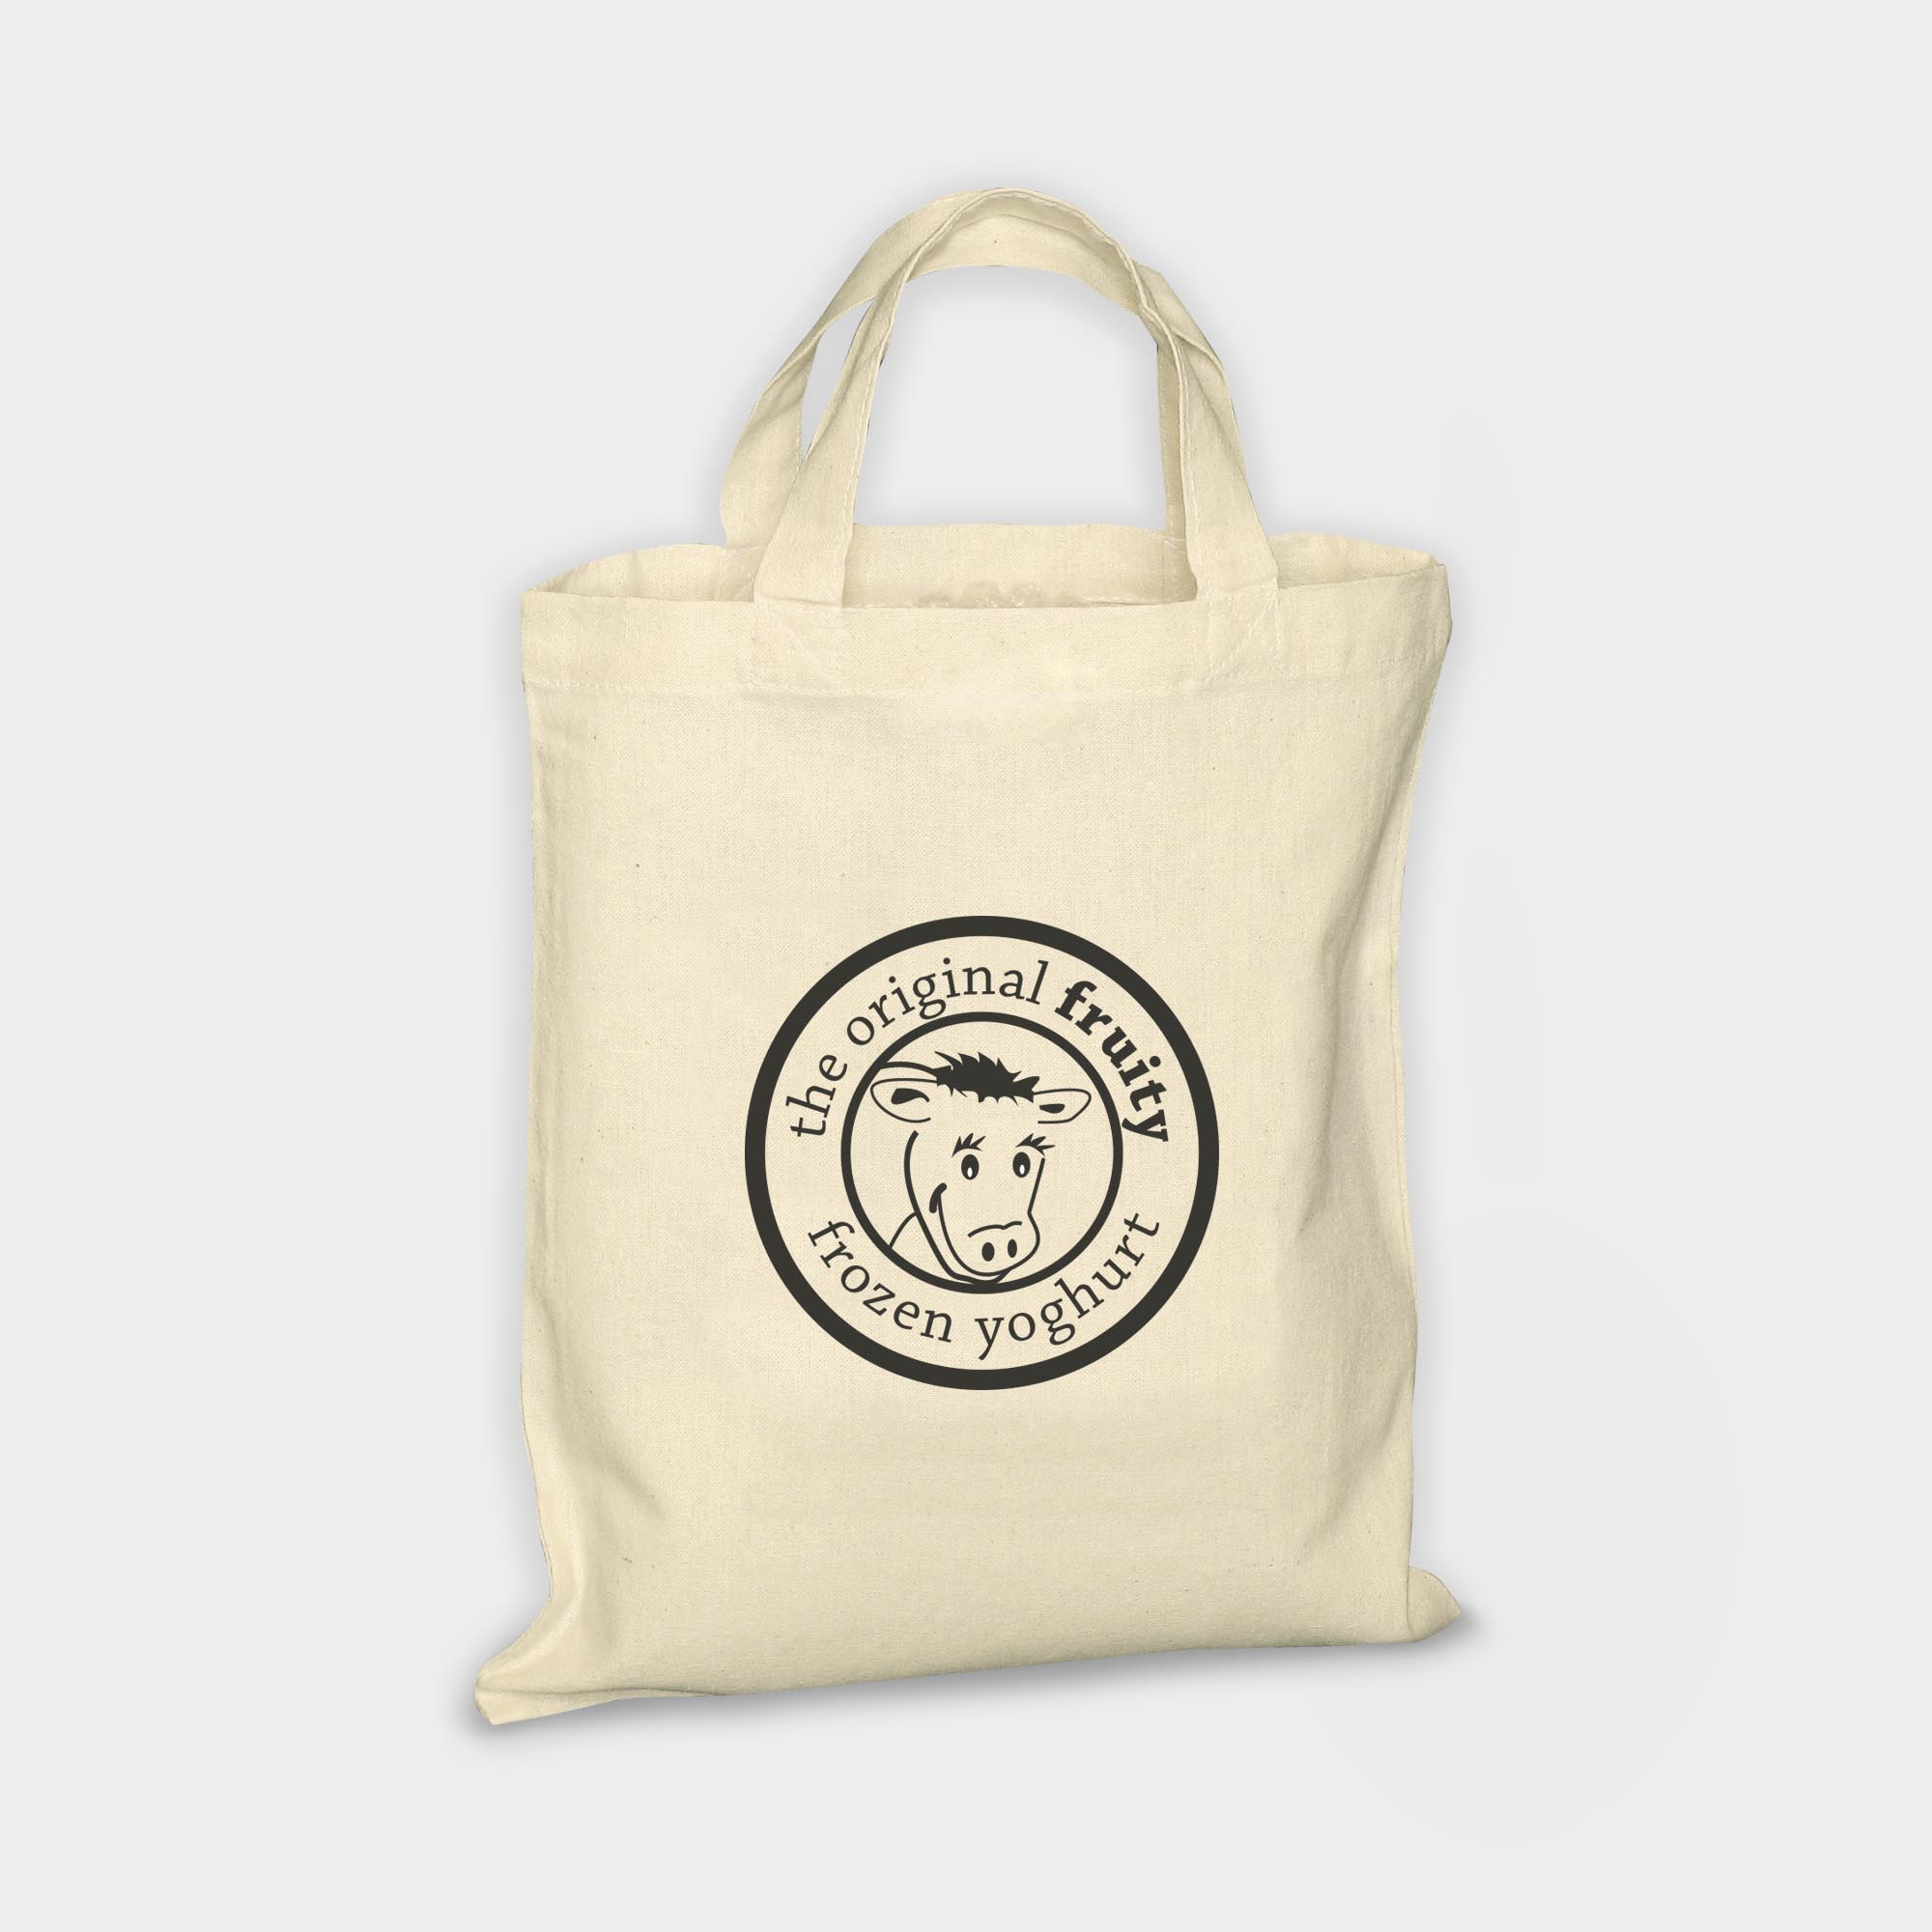 The Green & Good Greenwich Bag is made from unbleached natural cotton. Small tote bag with short handled. Perfect for those special gifts. Ethically produced in India in an audited factory. 4oz / 120gsm cotton. Oekotex 100 Standard.